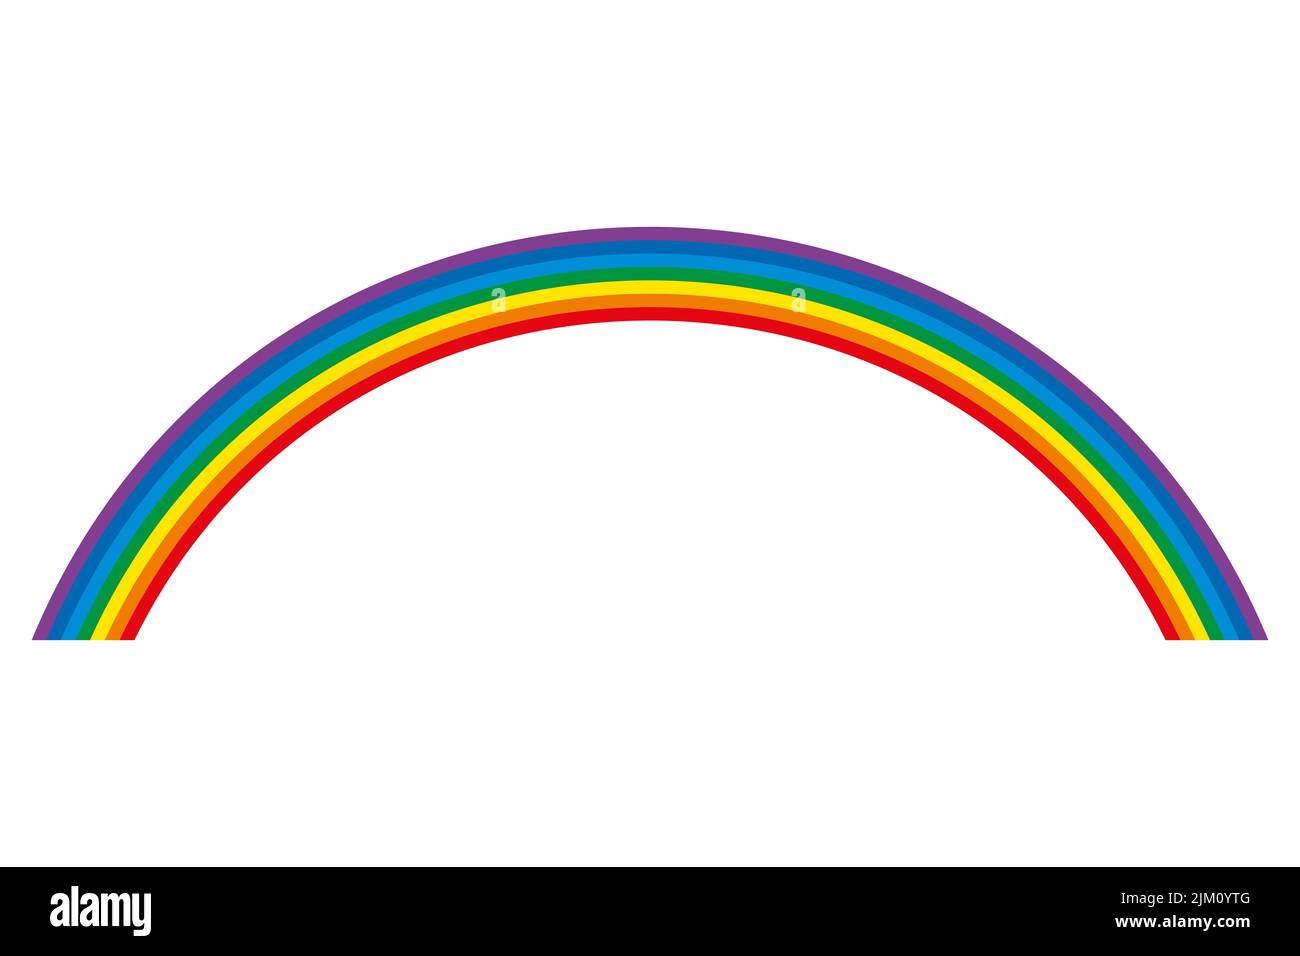 Rainbow, multicolored circular arc. 7 bent color bars, representing the spectrum of the visible light. Red, orange, yellow, green, cyan, blue, violet. Stock Photo